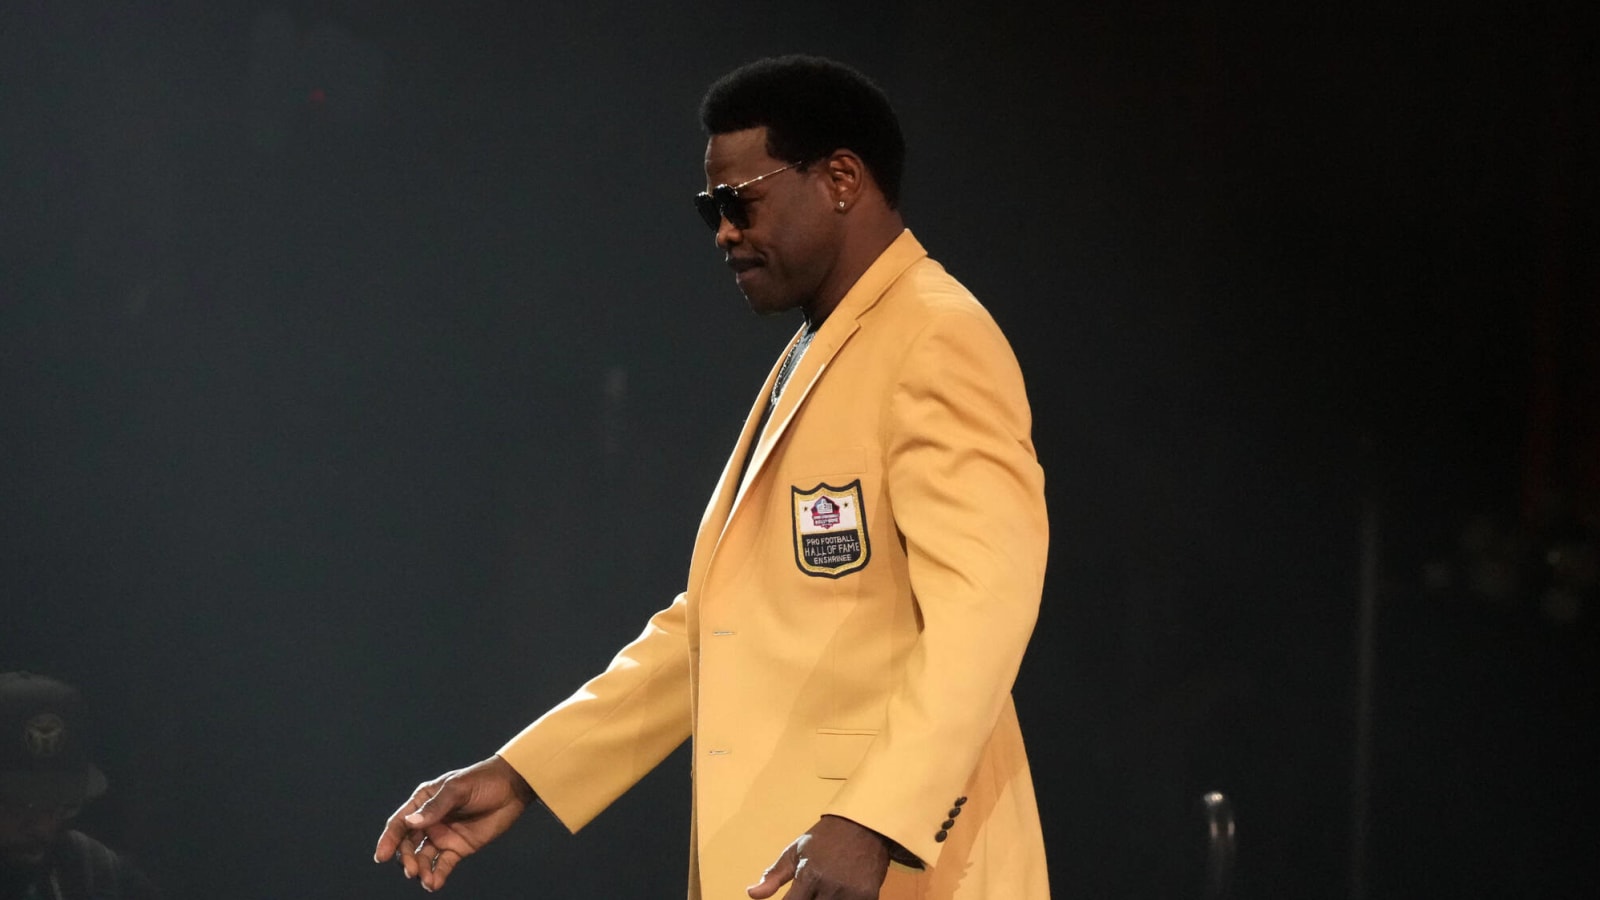 Michael Irvin Returns to TV As Legal Fight Continues